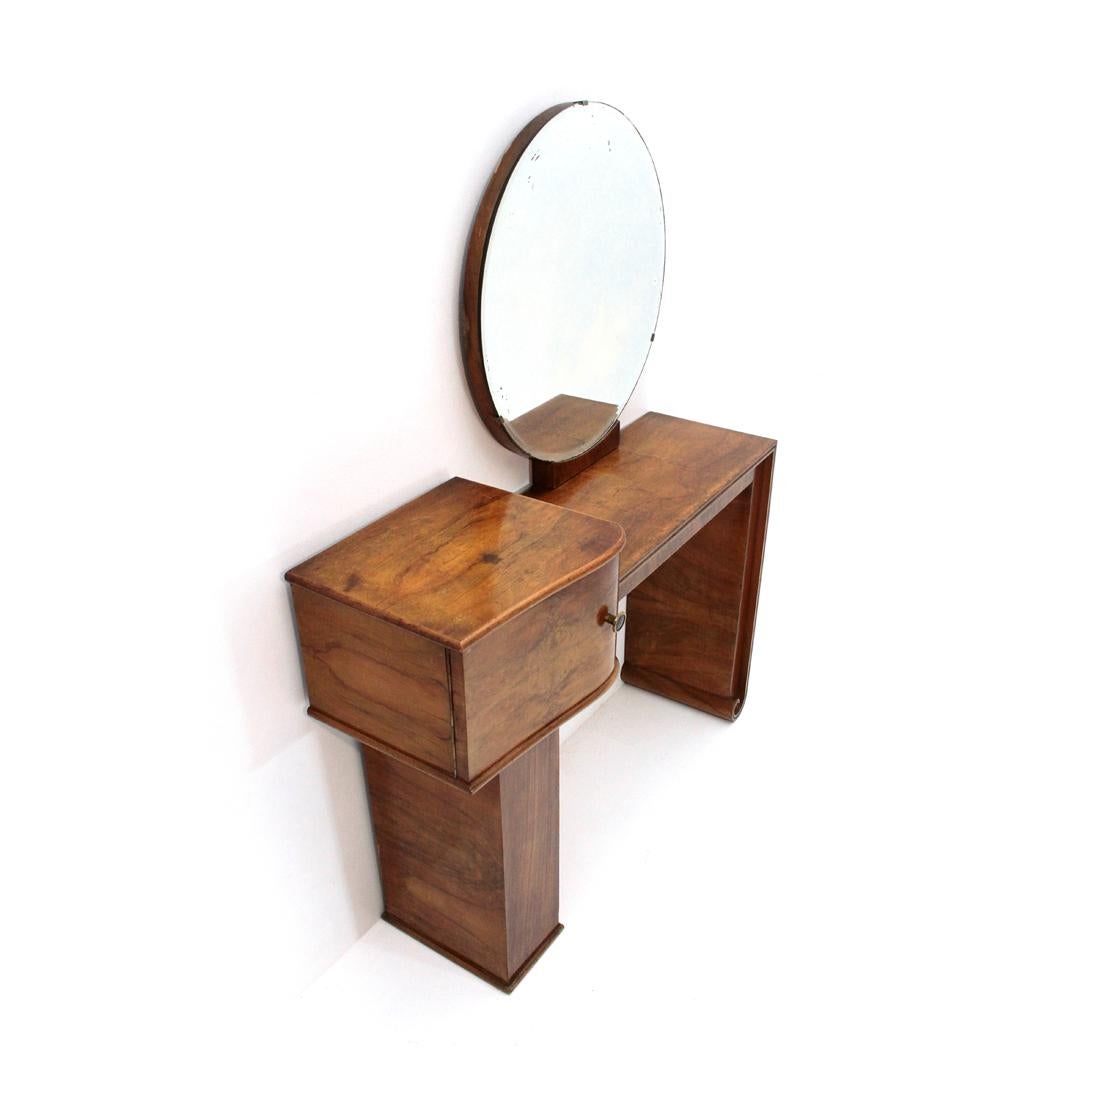 Italian manufacturing vanity desk produced in the 1930s.
Briar wood veneer structure.
Mirror in round mirrored glass with beveled edges.
Container with brass knob.
Good general conditions, some signs and lack of veneer due to normal use over time,